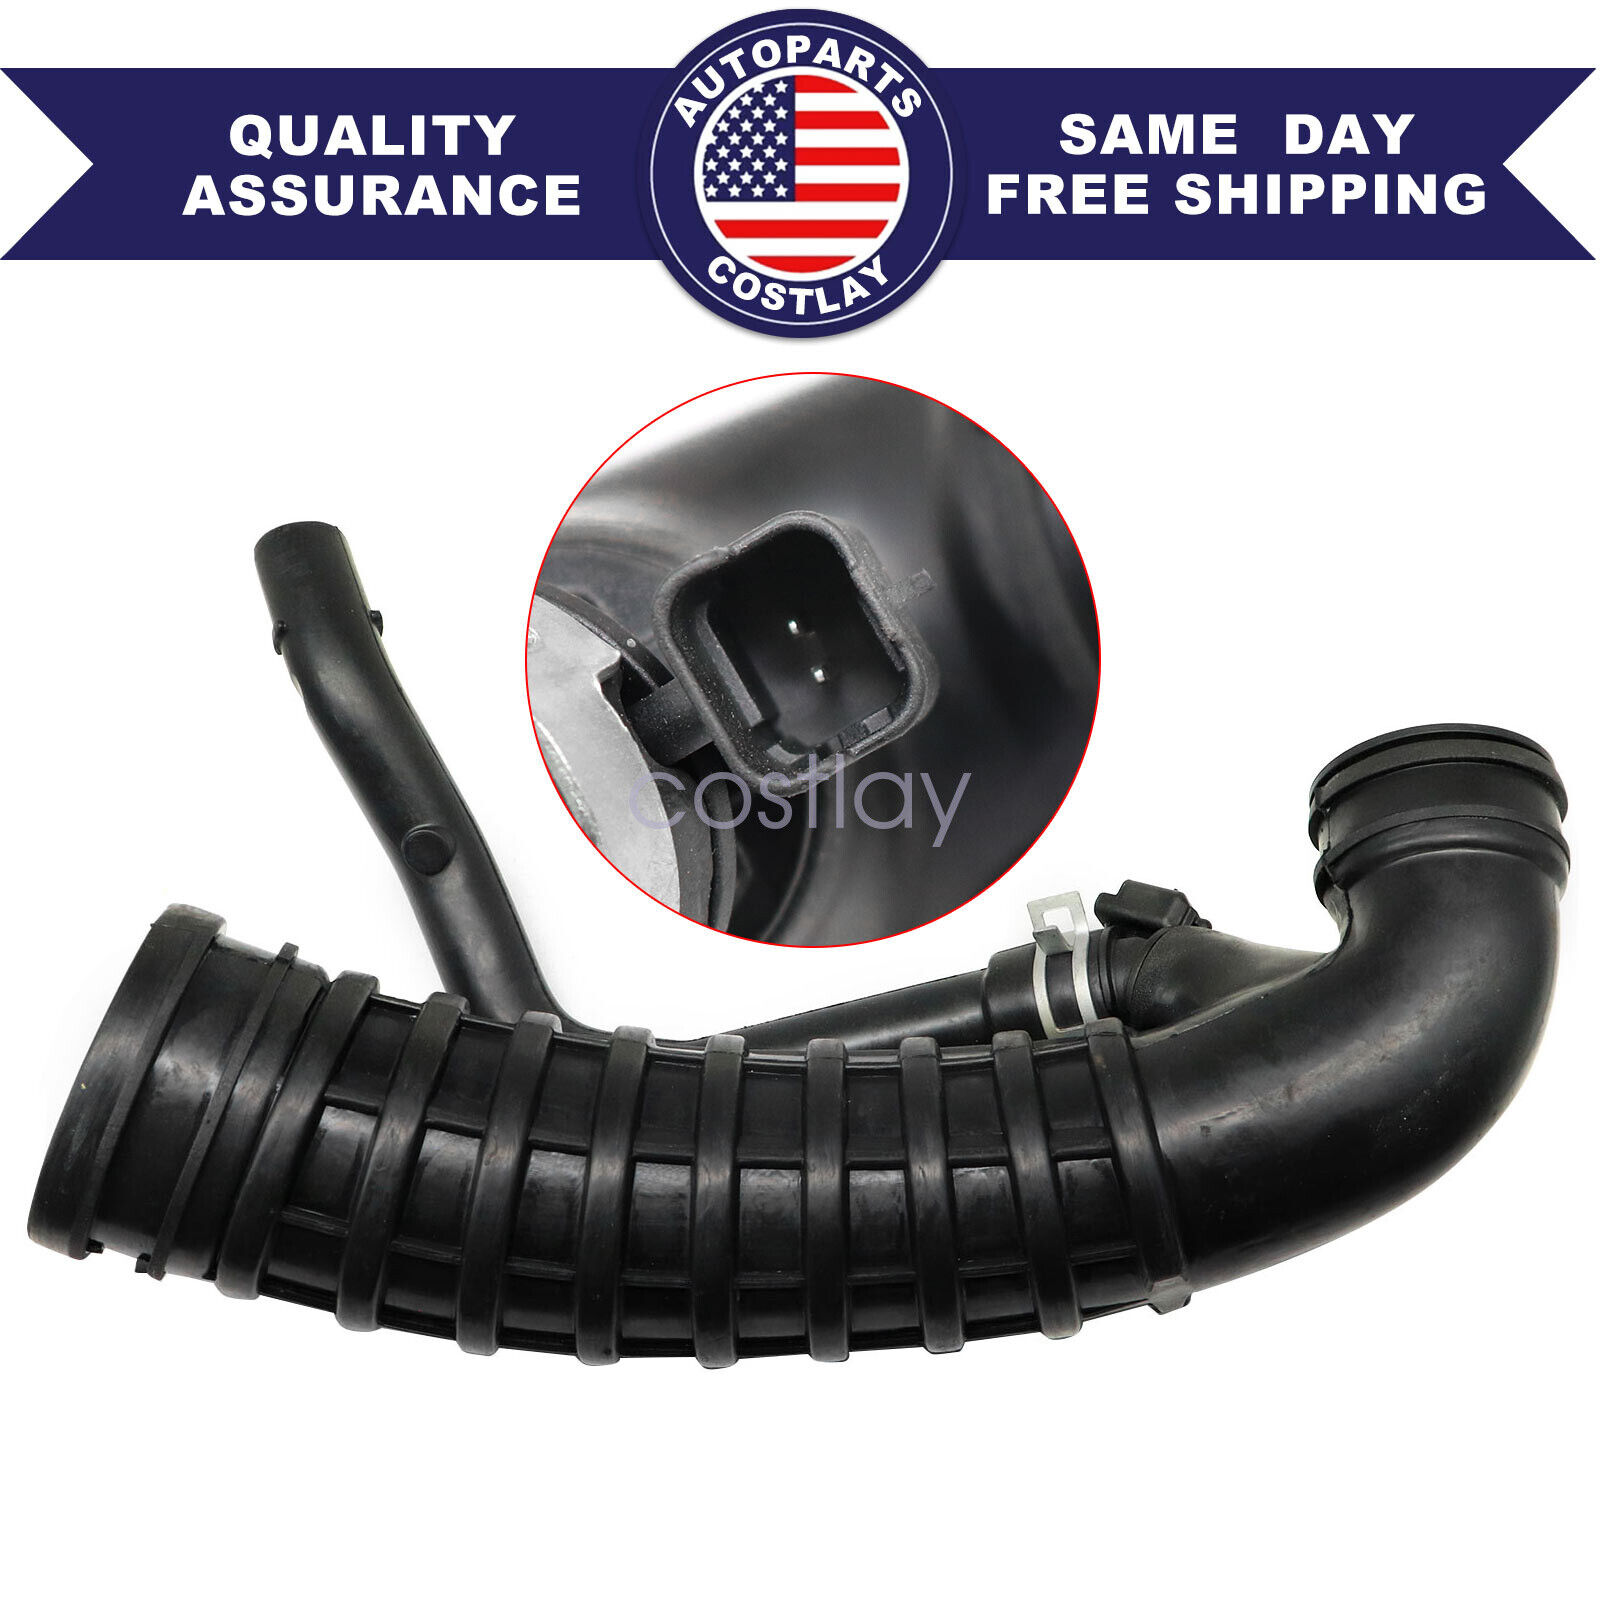 Air Intake Boot to Turbocharger for 07-10 Mini Cooper S R55 R56 R57 13717555784